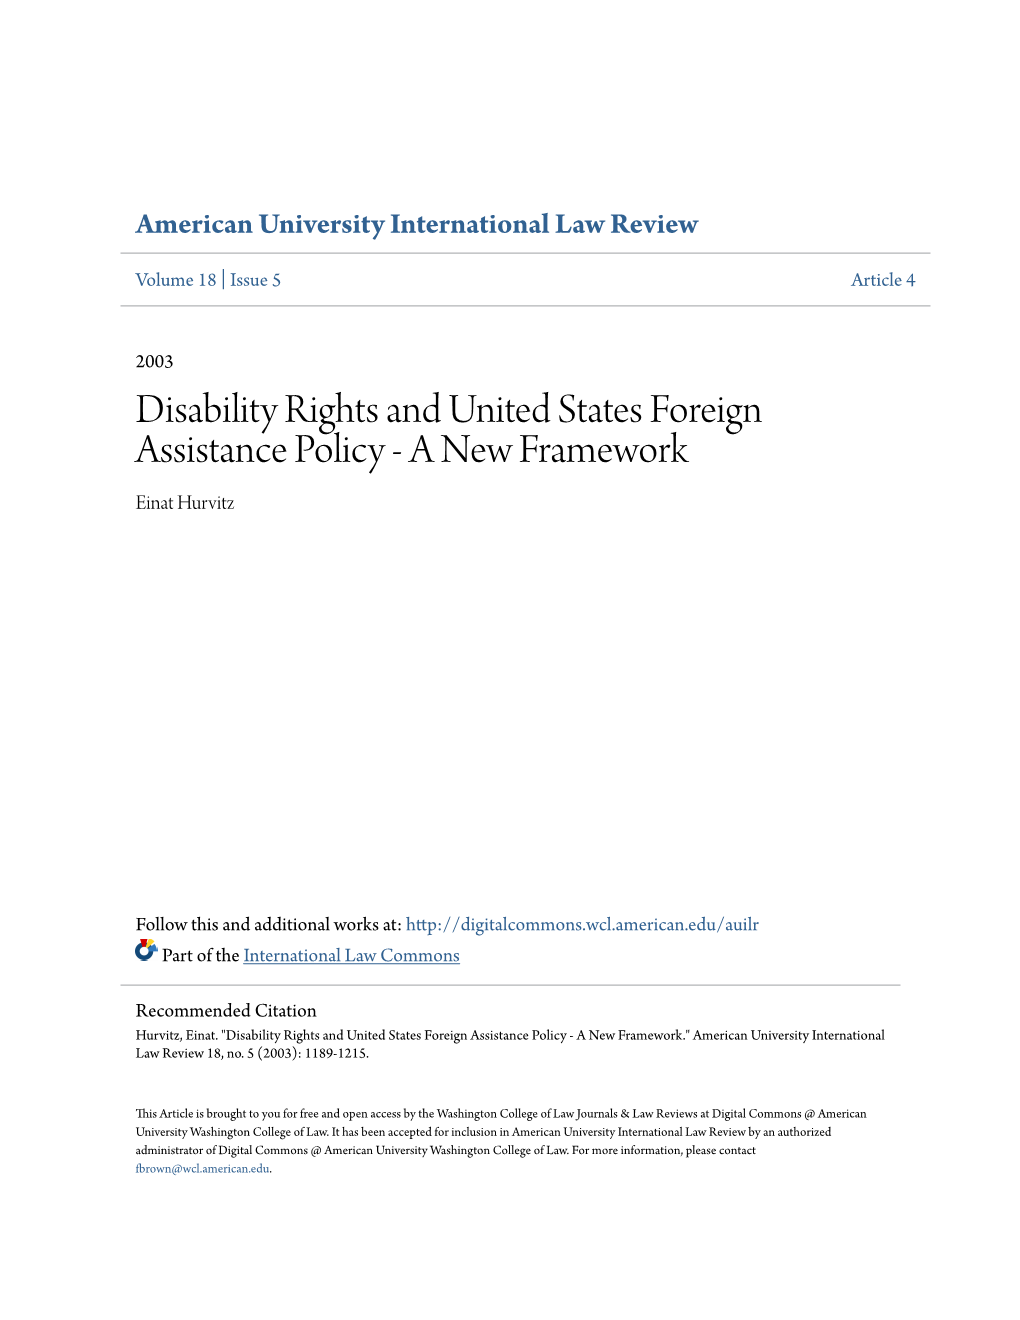 Disability Rights and United States Foreign Assistance Policy - a New Framework Einat Hurvitz